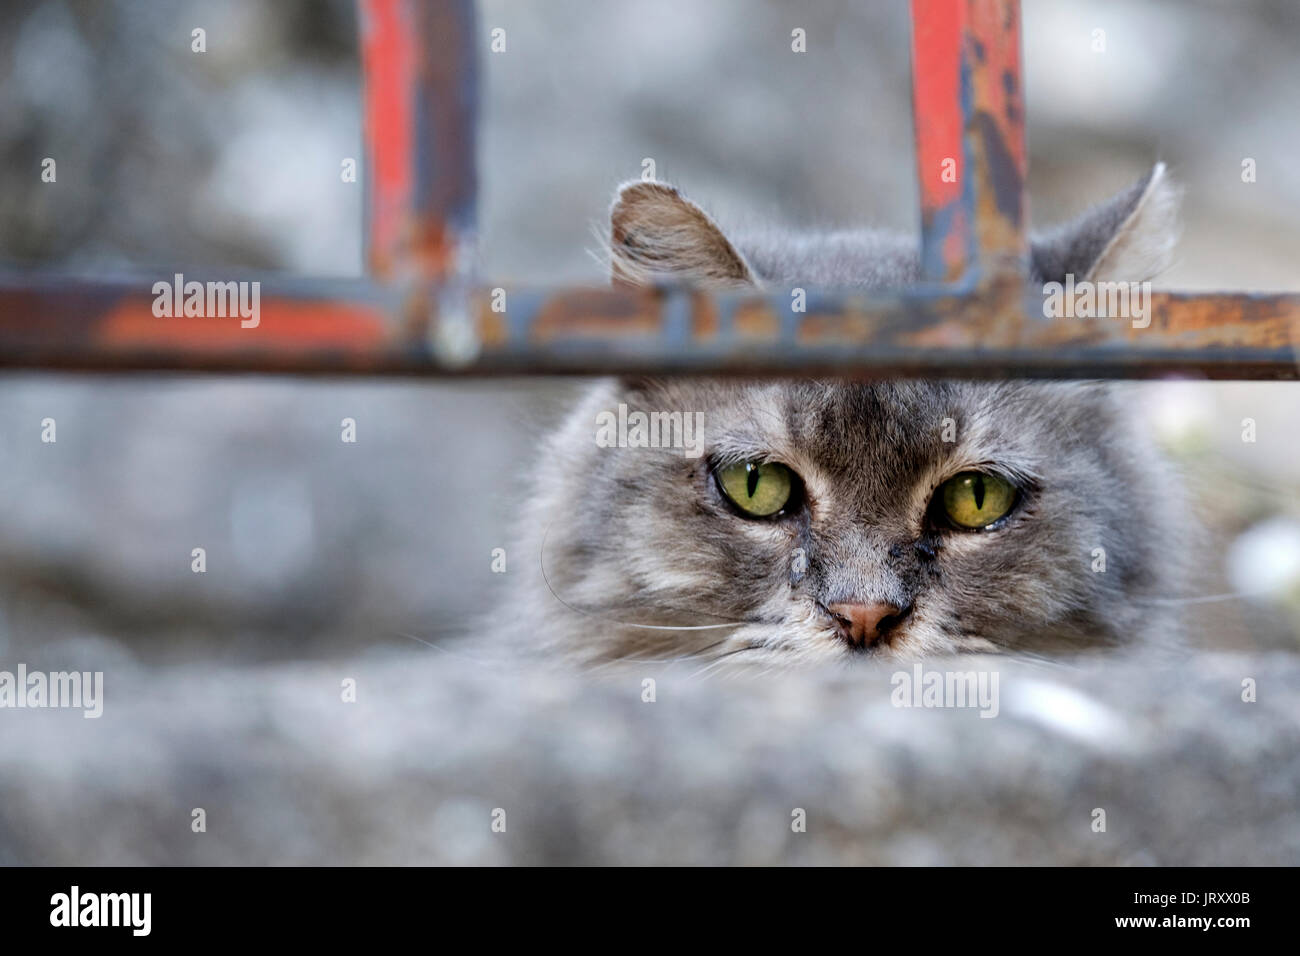 A domestic grey cat with bright green eyes staring straight into the camera through some old rusty railings Stock Photo